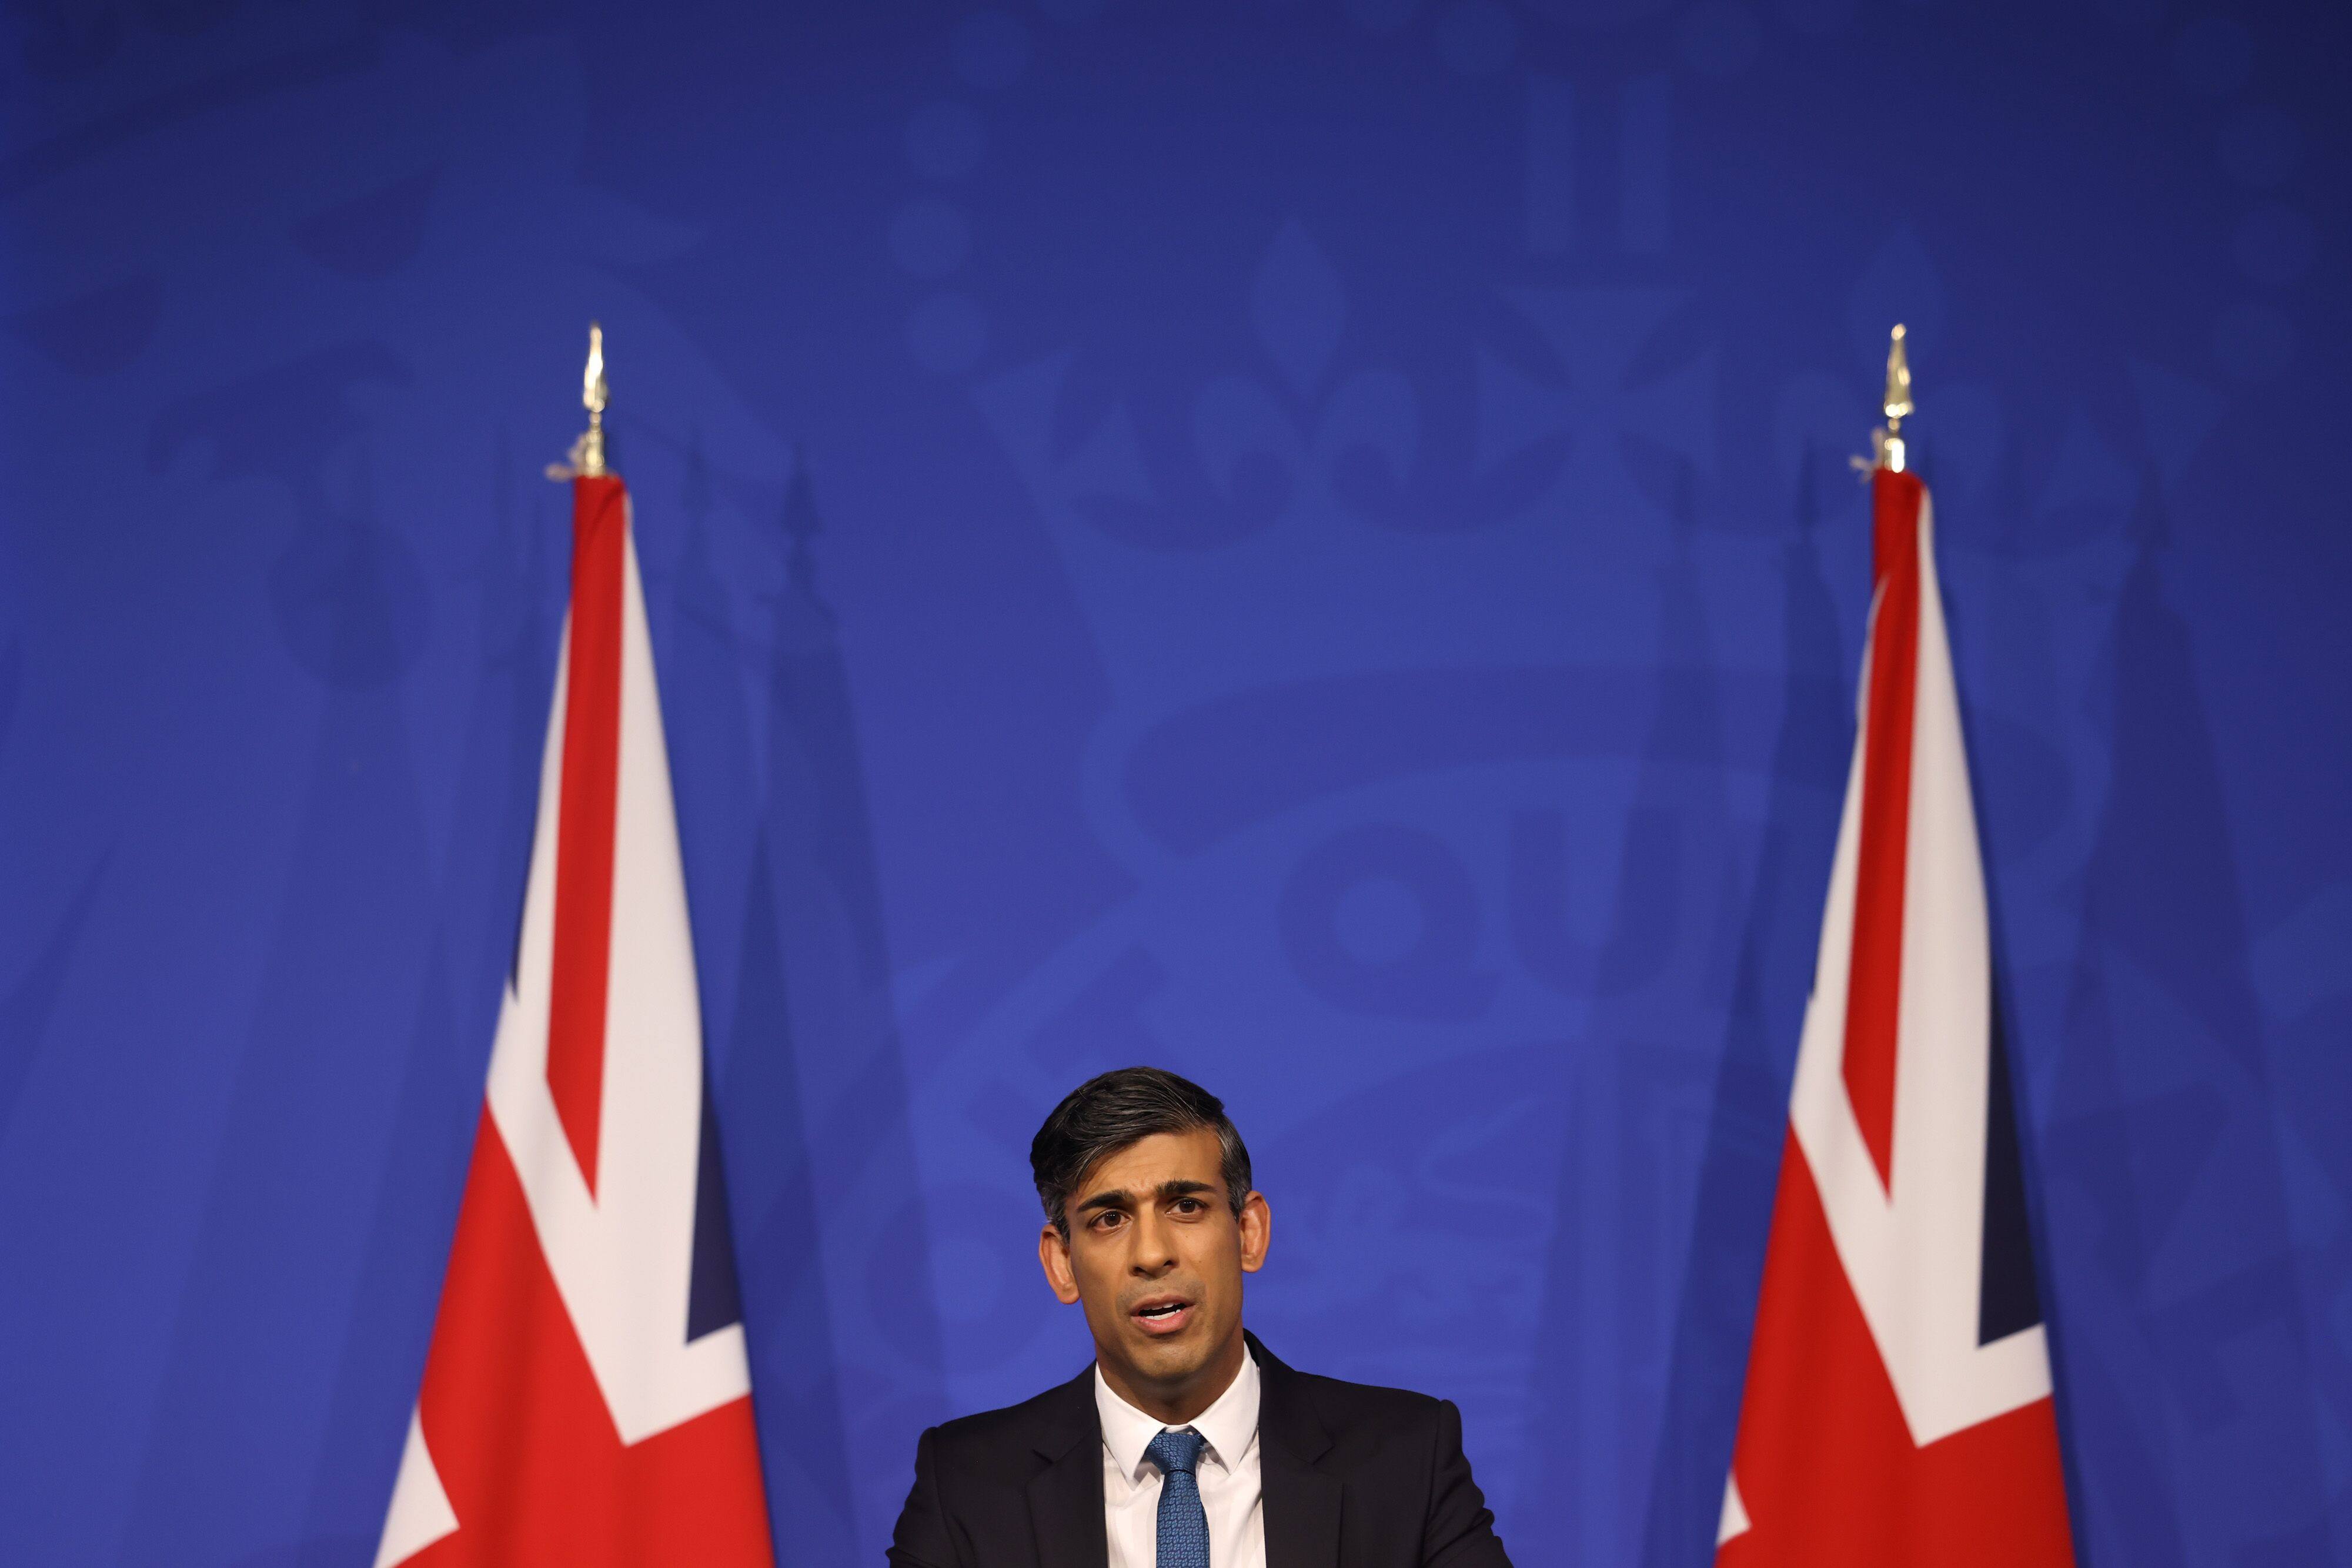 British Prime Minister Rishi Sunak speaks at a news conference in Downing Street in London, UK, on November 15. Photo: Bloomberg